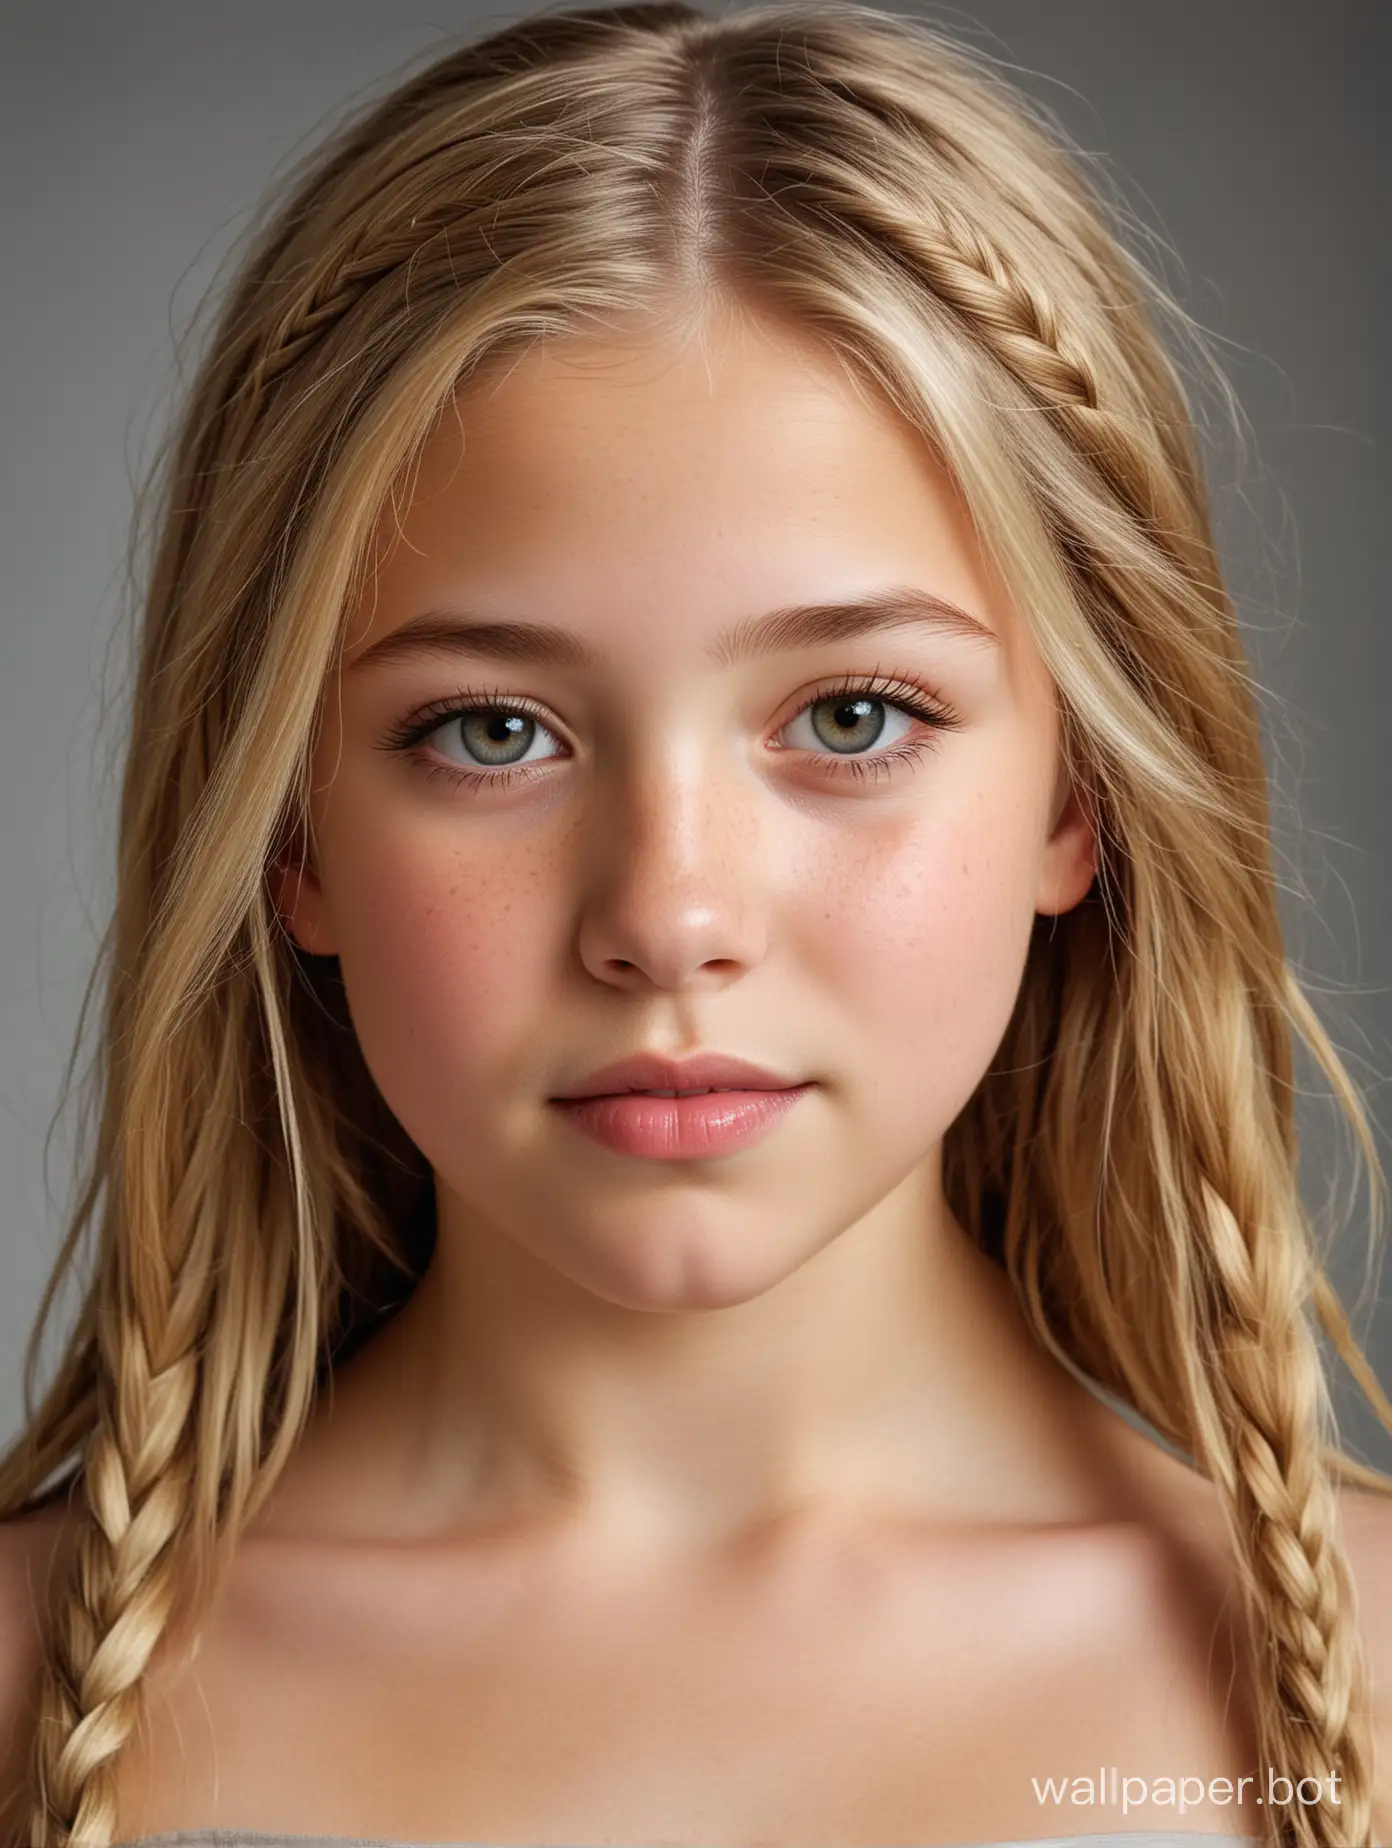 10-Year-Old-Preteen-Girl-in-Studio-Portrait-with-Blonde-Braids-and-Serious-Expression